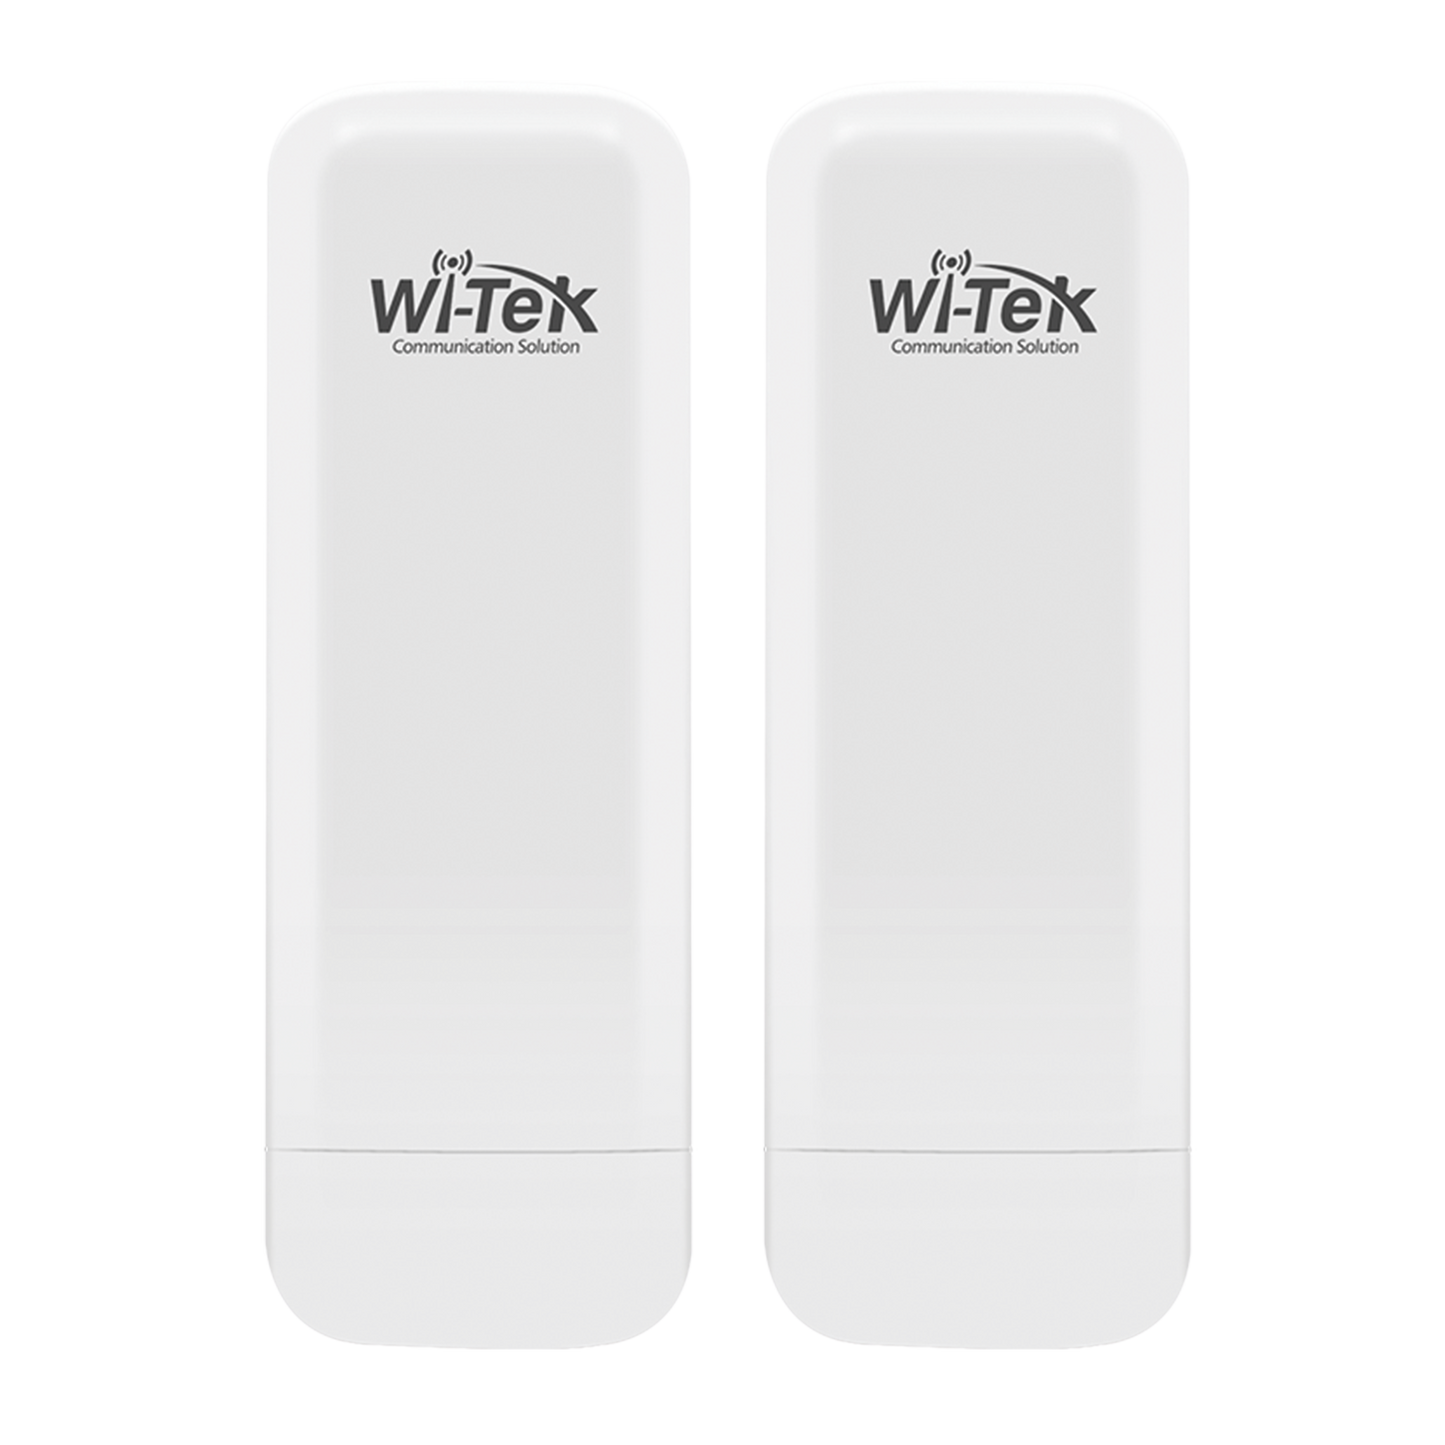 Wireless Transmitter Kit, up to 3.1 miles ideal for video surveillance, 5 GHz, up to 300Mbps, 13dBi, IP65, Plug and Play, 60° Beamwidth, Cloud management.